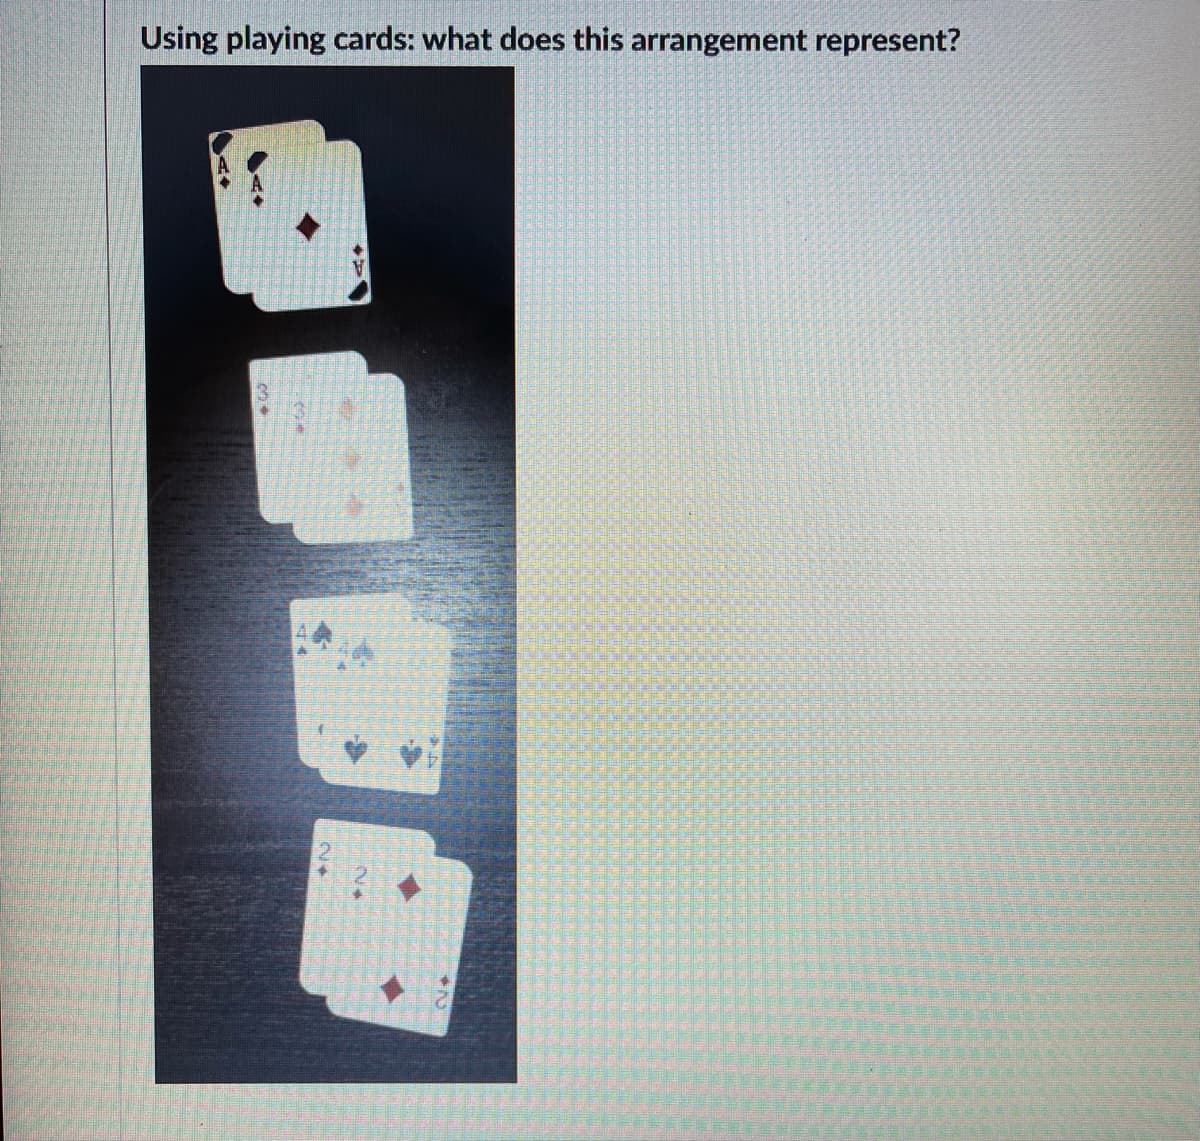 Using playing cards: what does this arrangement represent?
